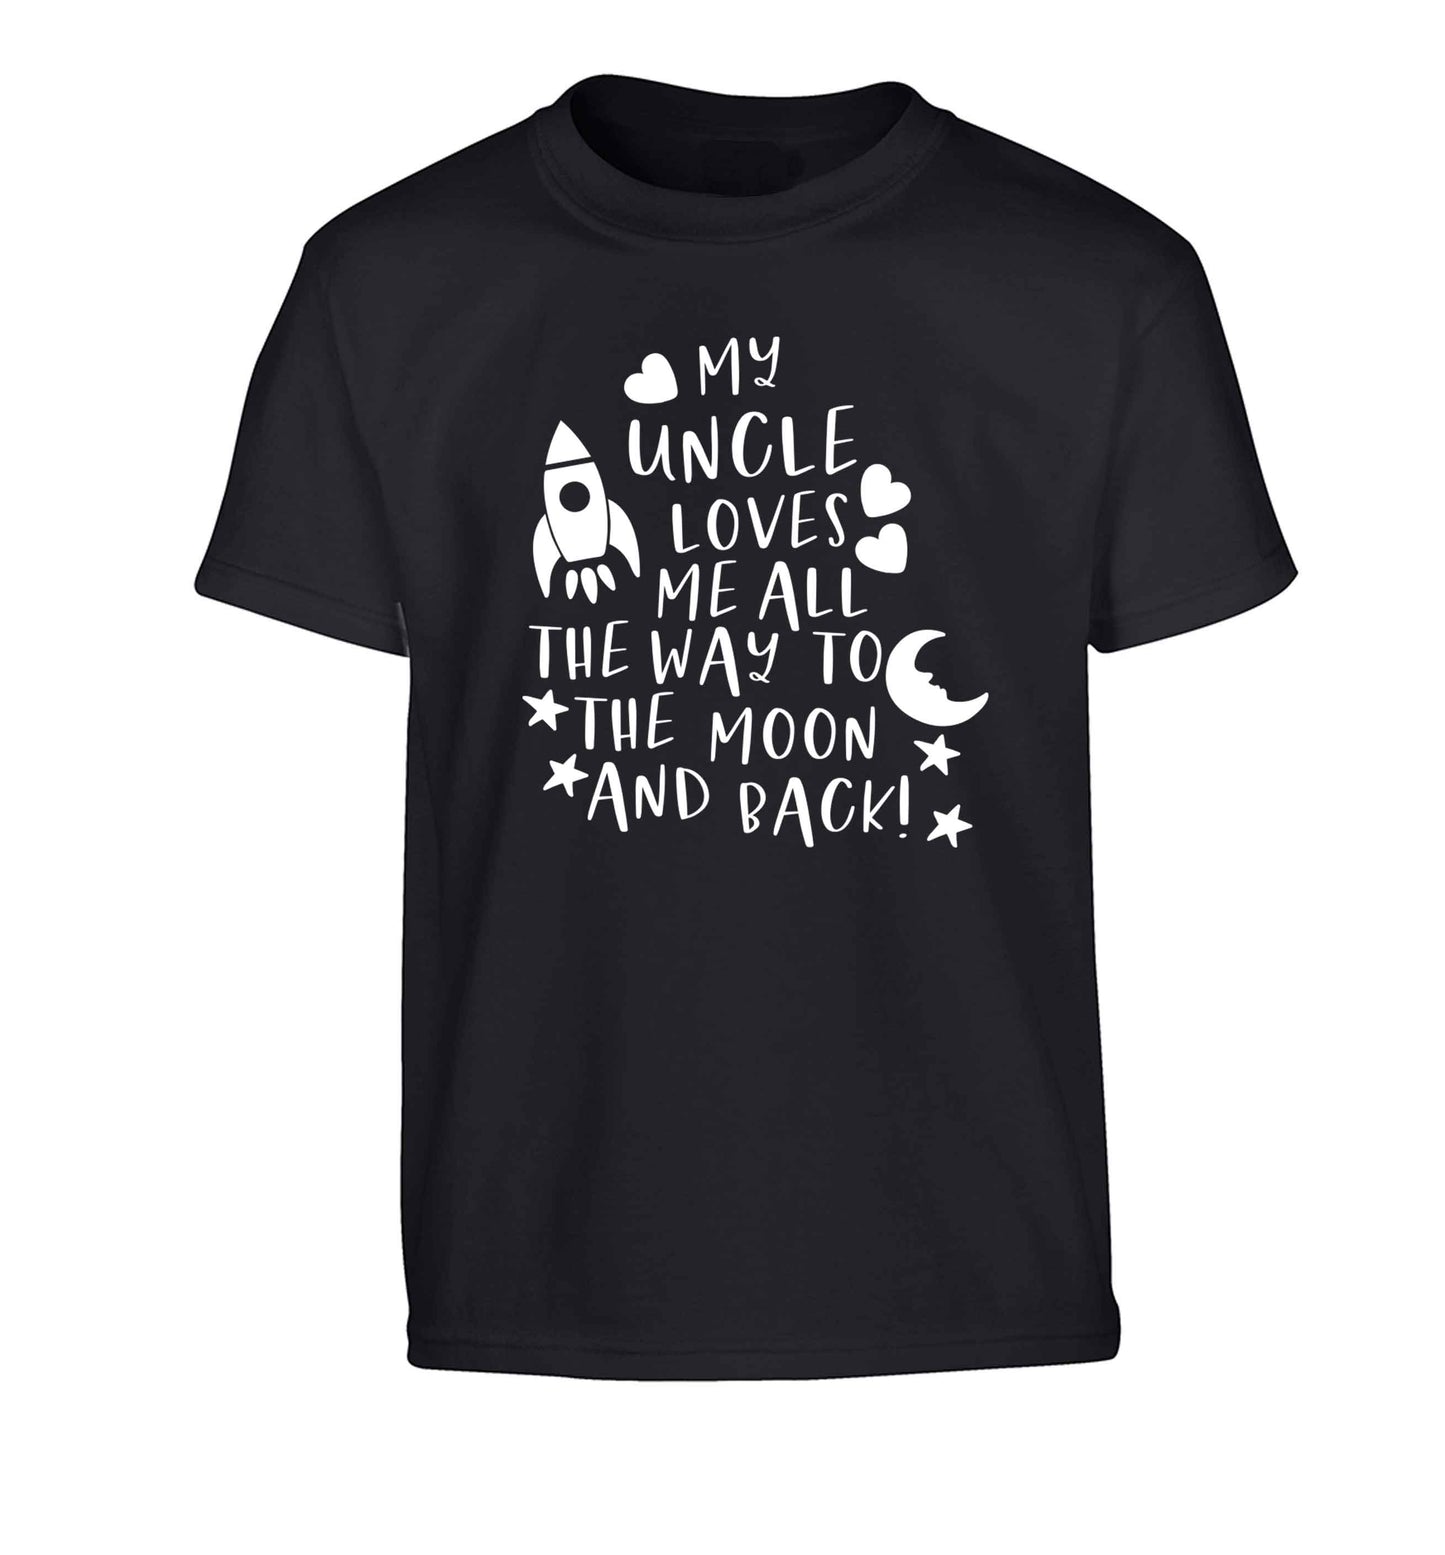 My uncle loves me all the way to the moon and back Children's black Tshirt 12-13 Years